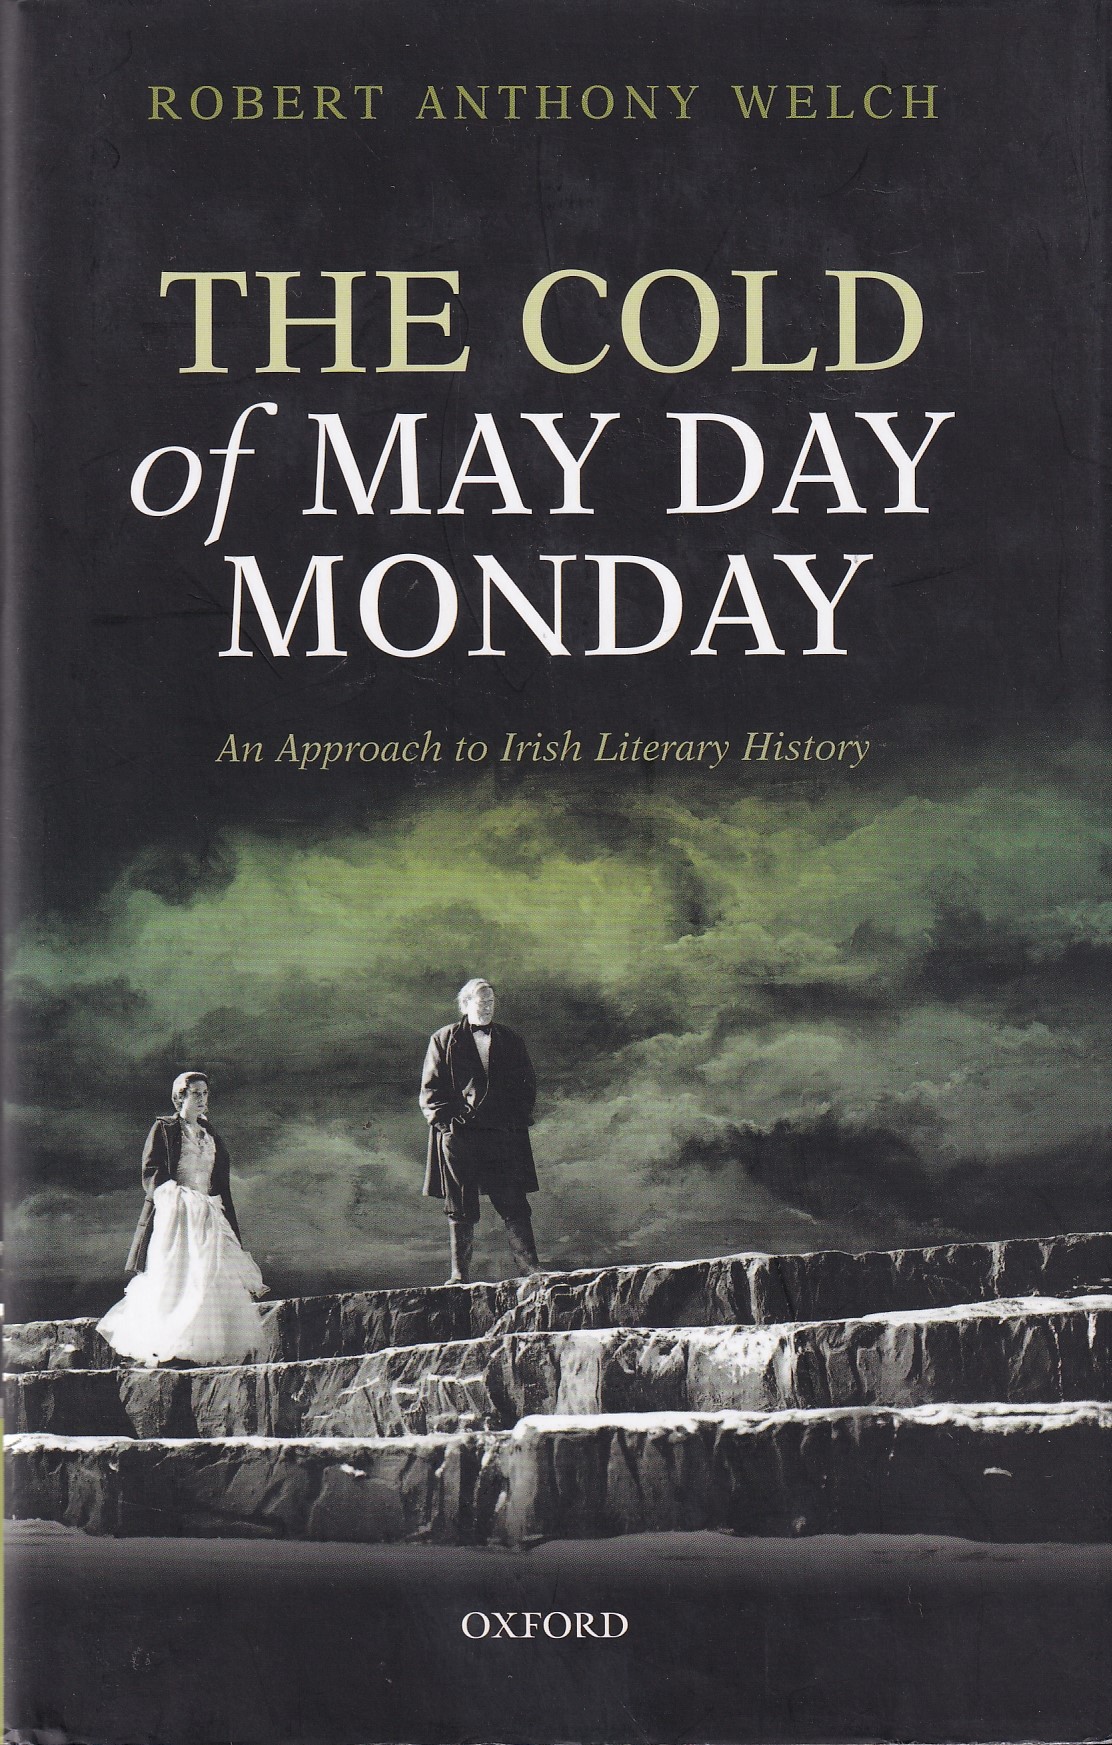 The Cold of May Day Monday : An Approach to Irish Literary History | Robert Anthony Welch | Charlie Byrne's